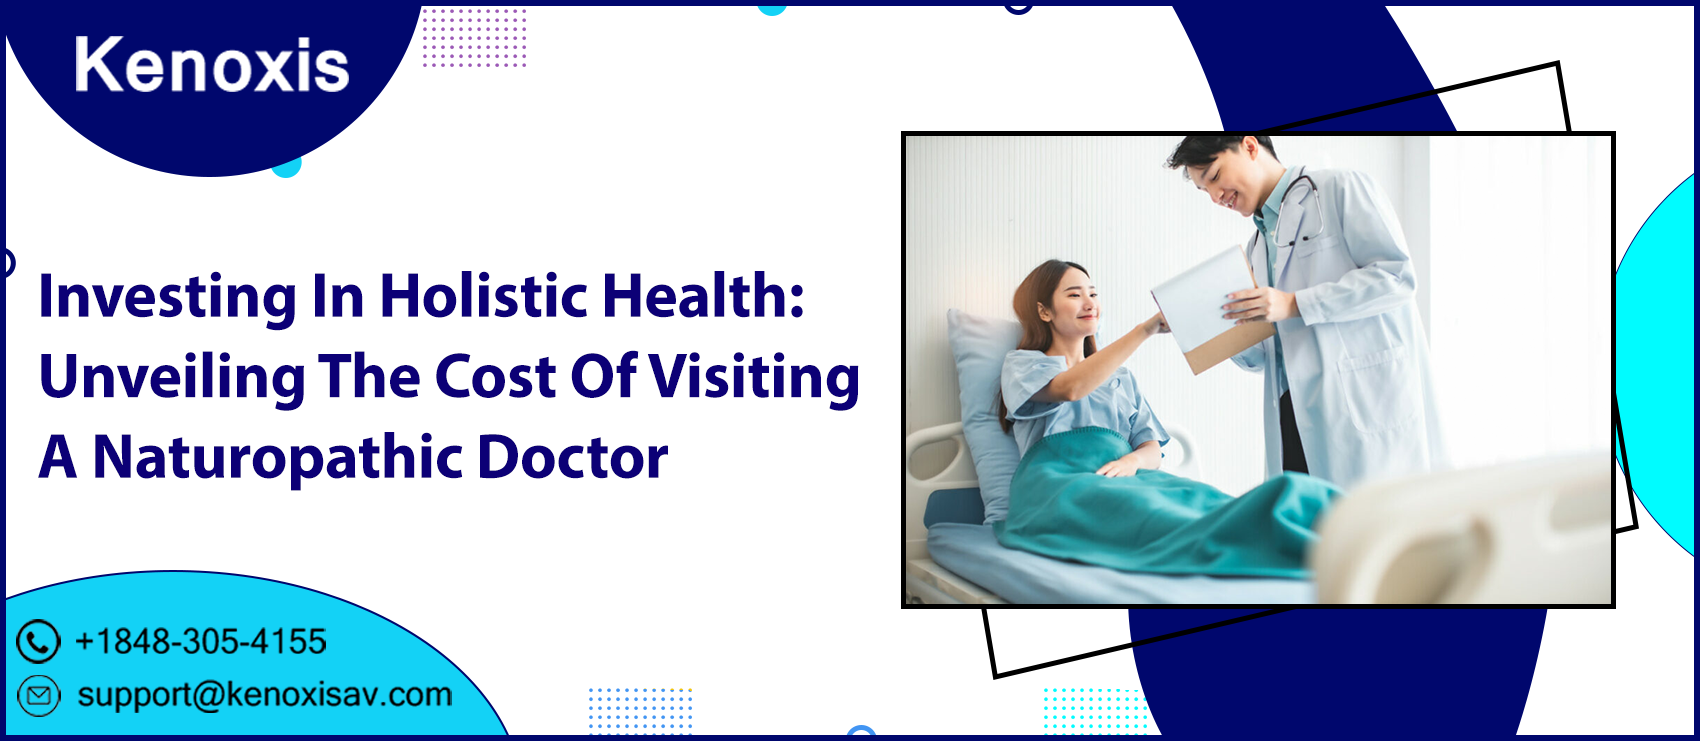 Investing In Holistic Health: Unveiling The Cost Of Visiting A Naturopathic Doctor